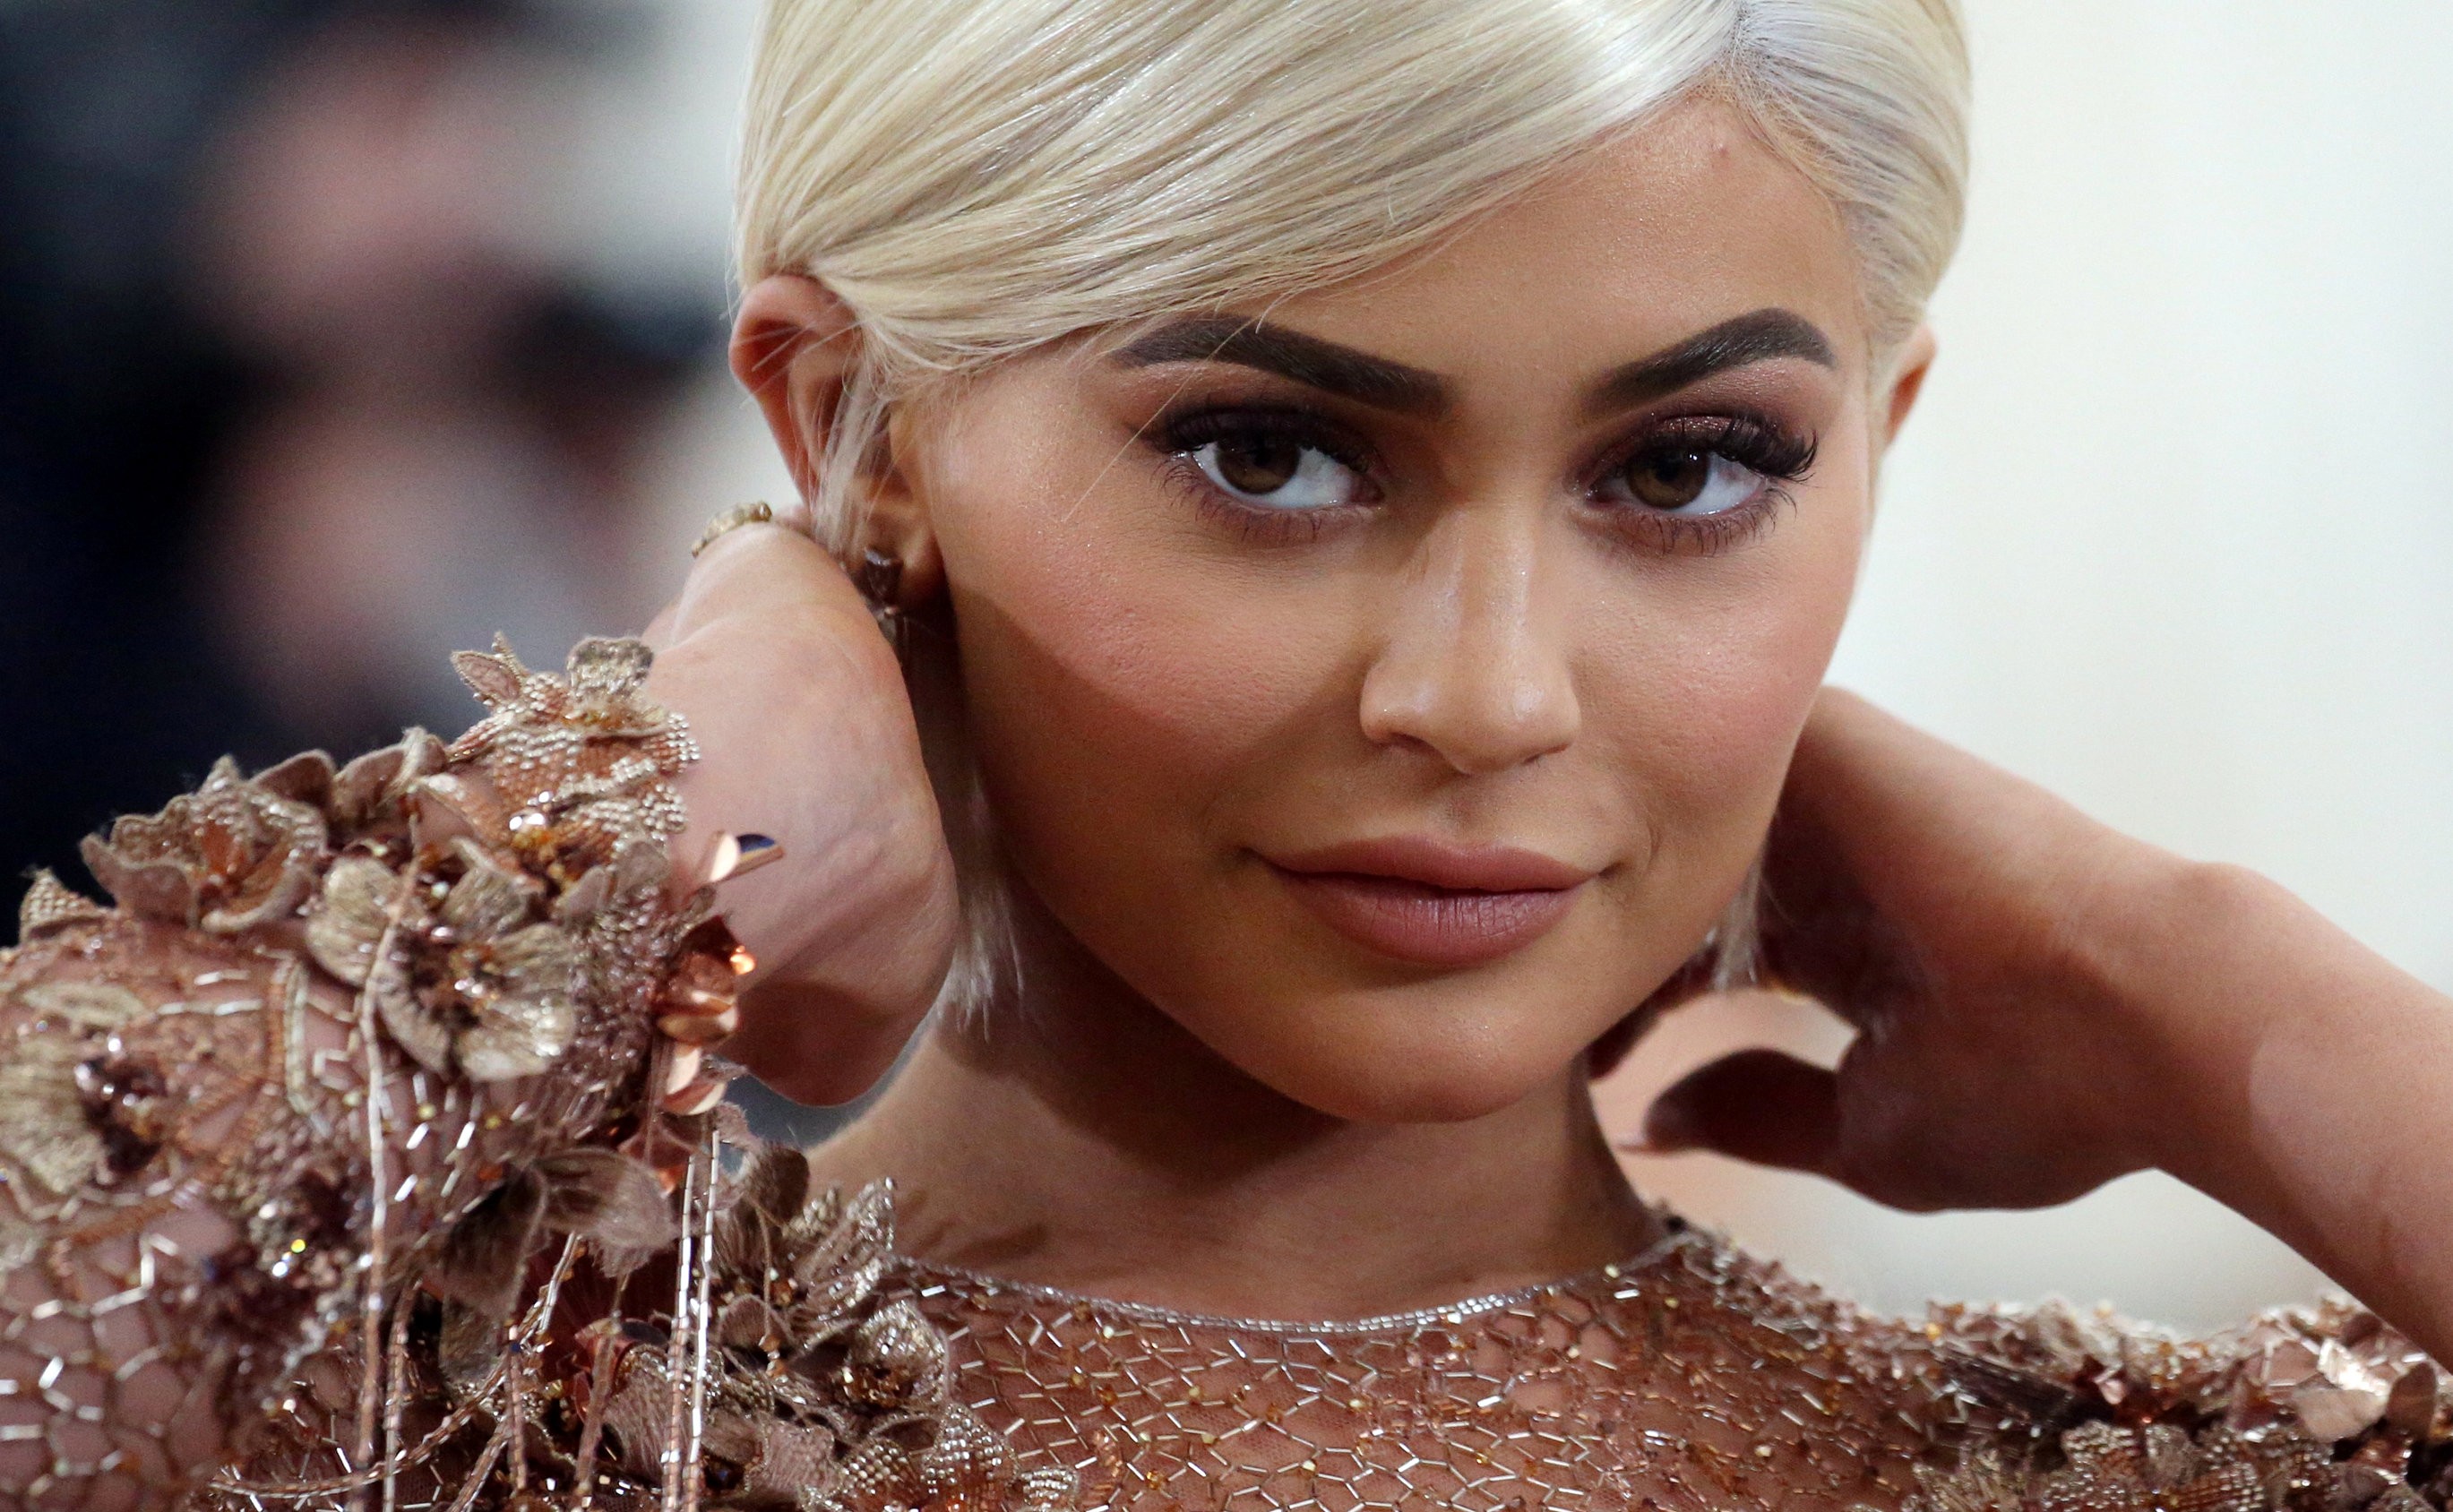 Kylie Jenner has made the Forbes list of America’s Richest Self-Made Women. Photo: Reuters